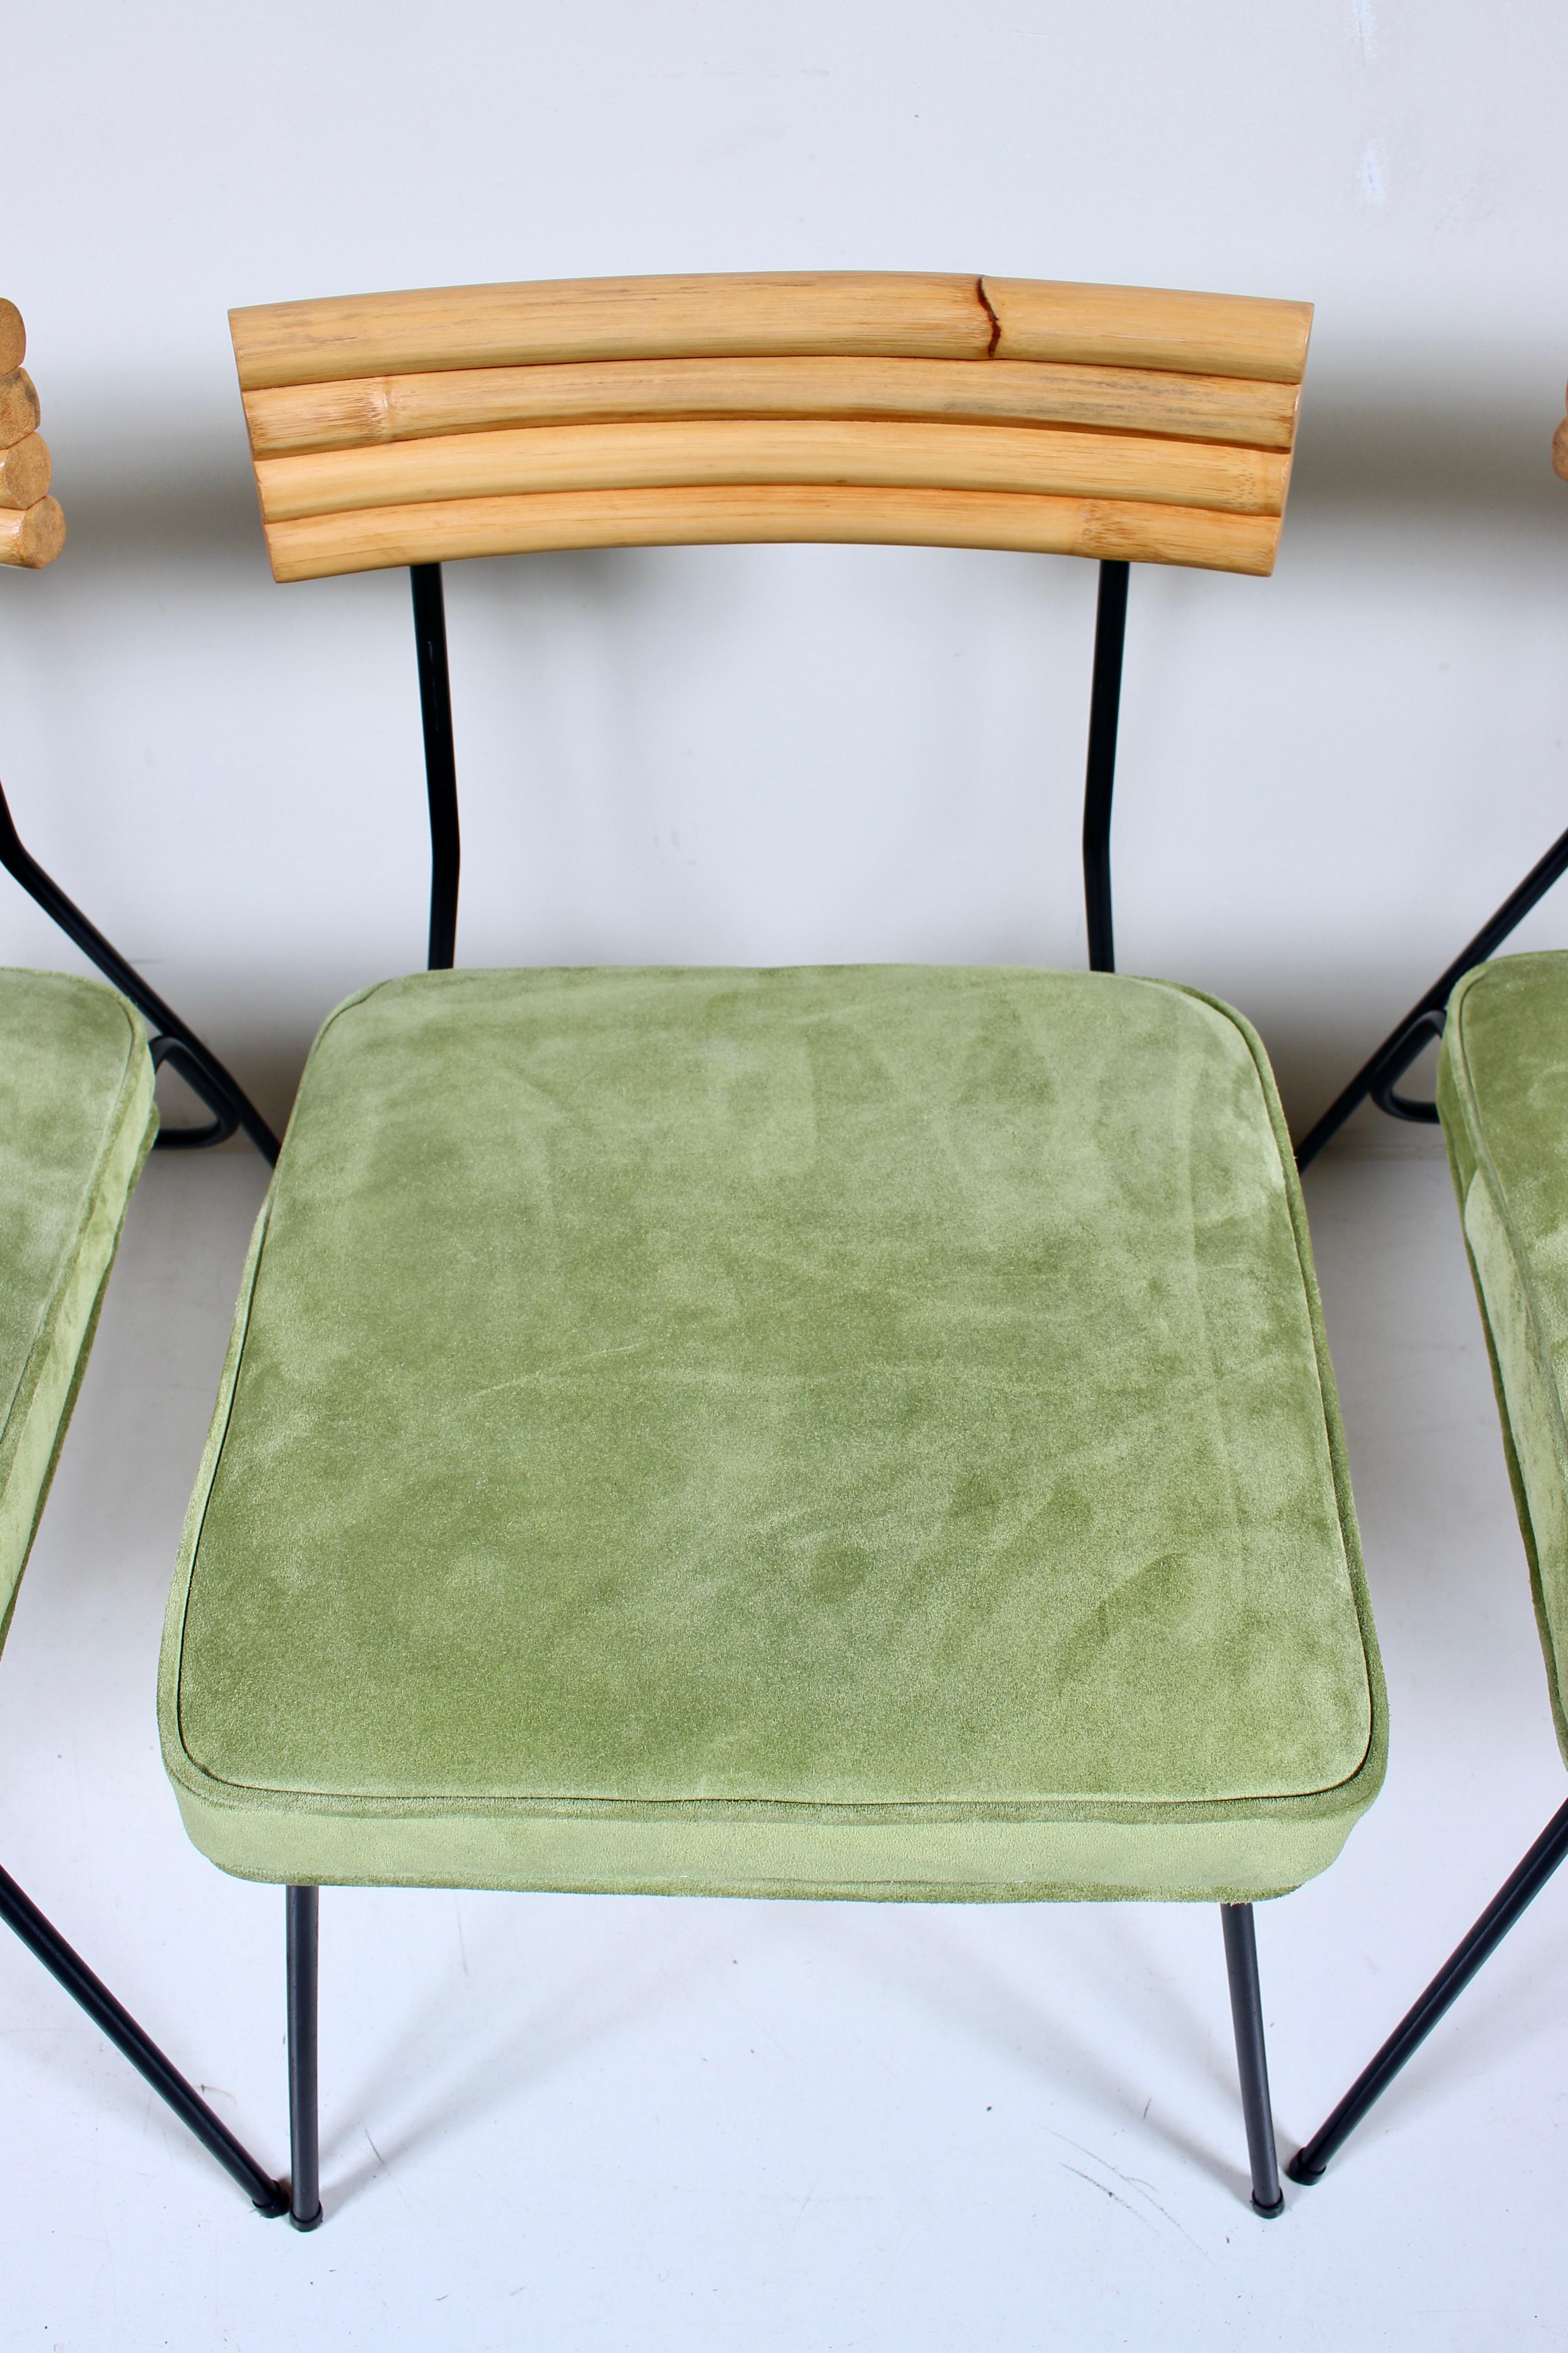 Set of 4 Herb & Shirley Ritts Iron, Bamboo & Suede Dining Side Chairs, 1950s For Sale 1